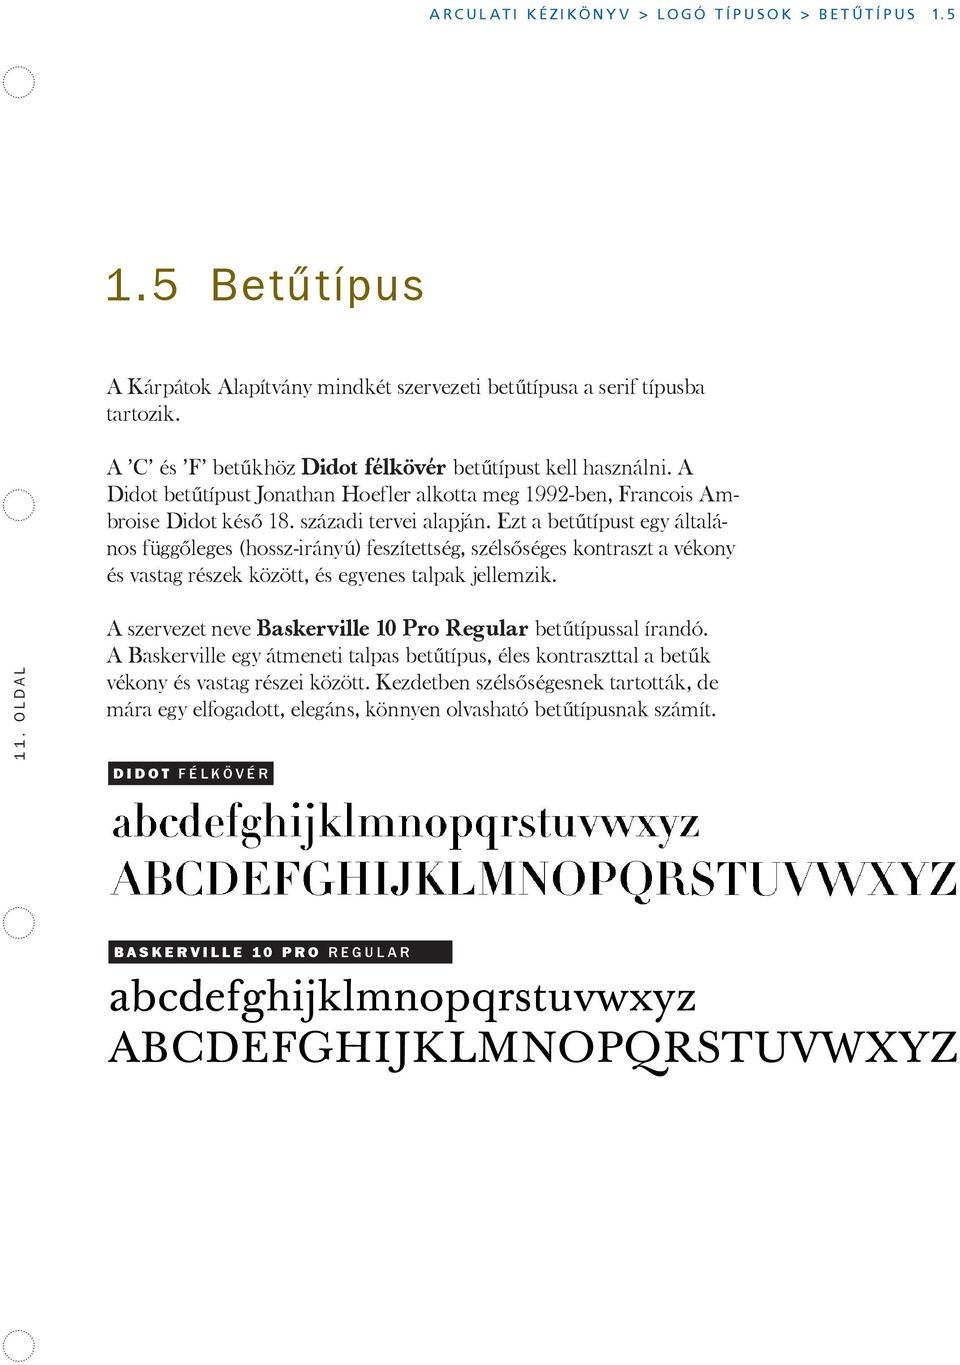 A G oldal E For the types C and F is used Didot bold. Didot was created by Jonathan Hoefler in, inspired by the late eight- A C és F betűkhöz Didot félkövér betűtípust kell használni.